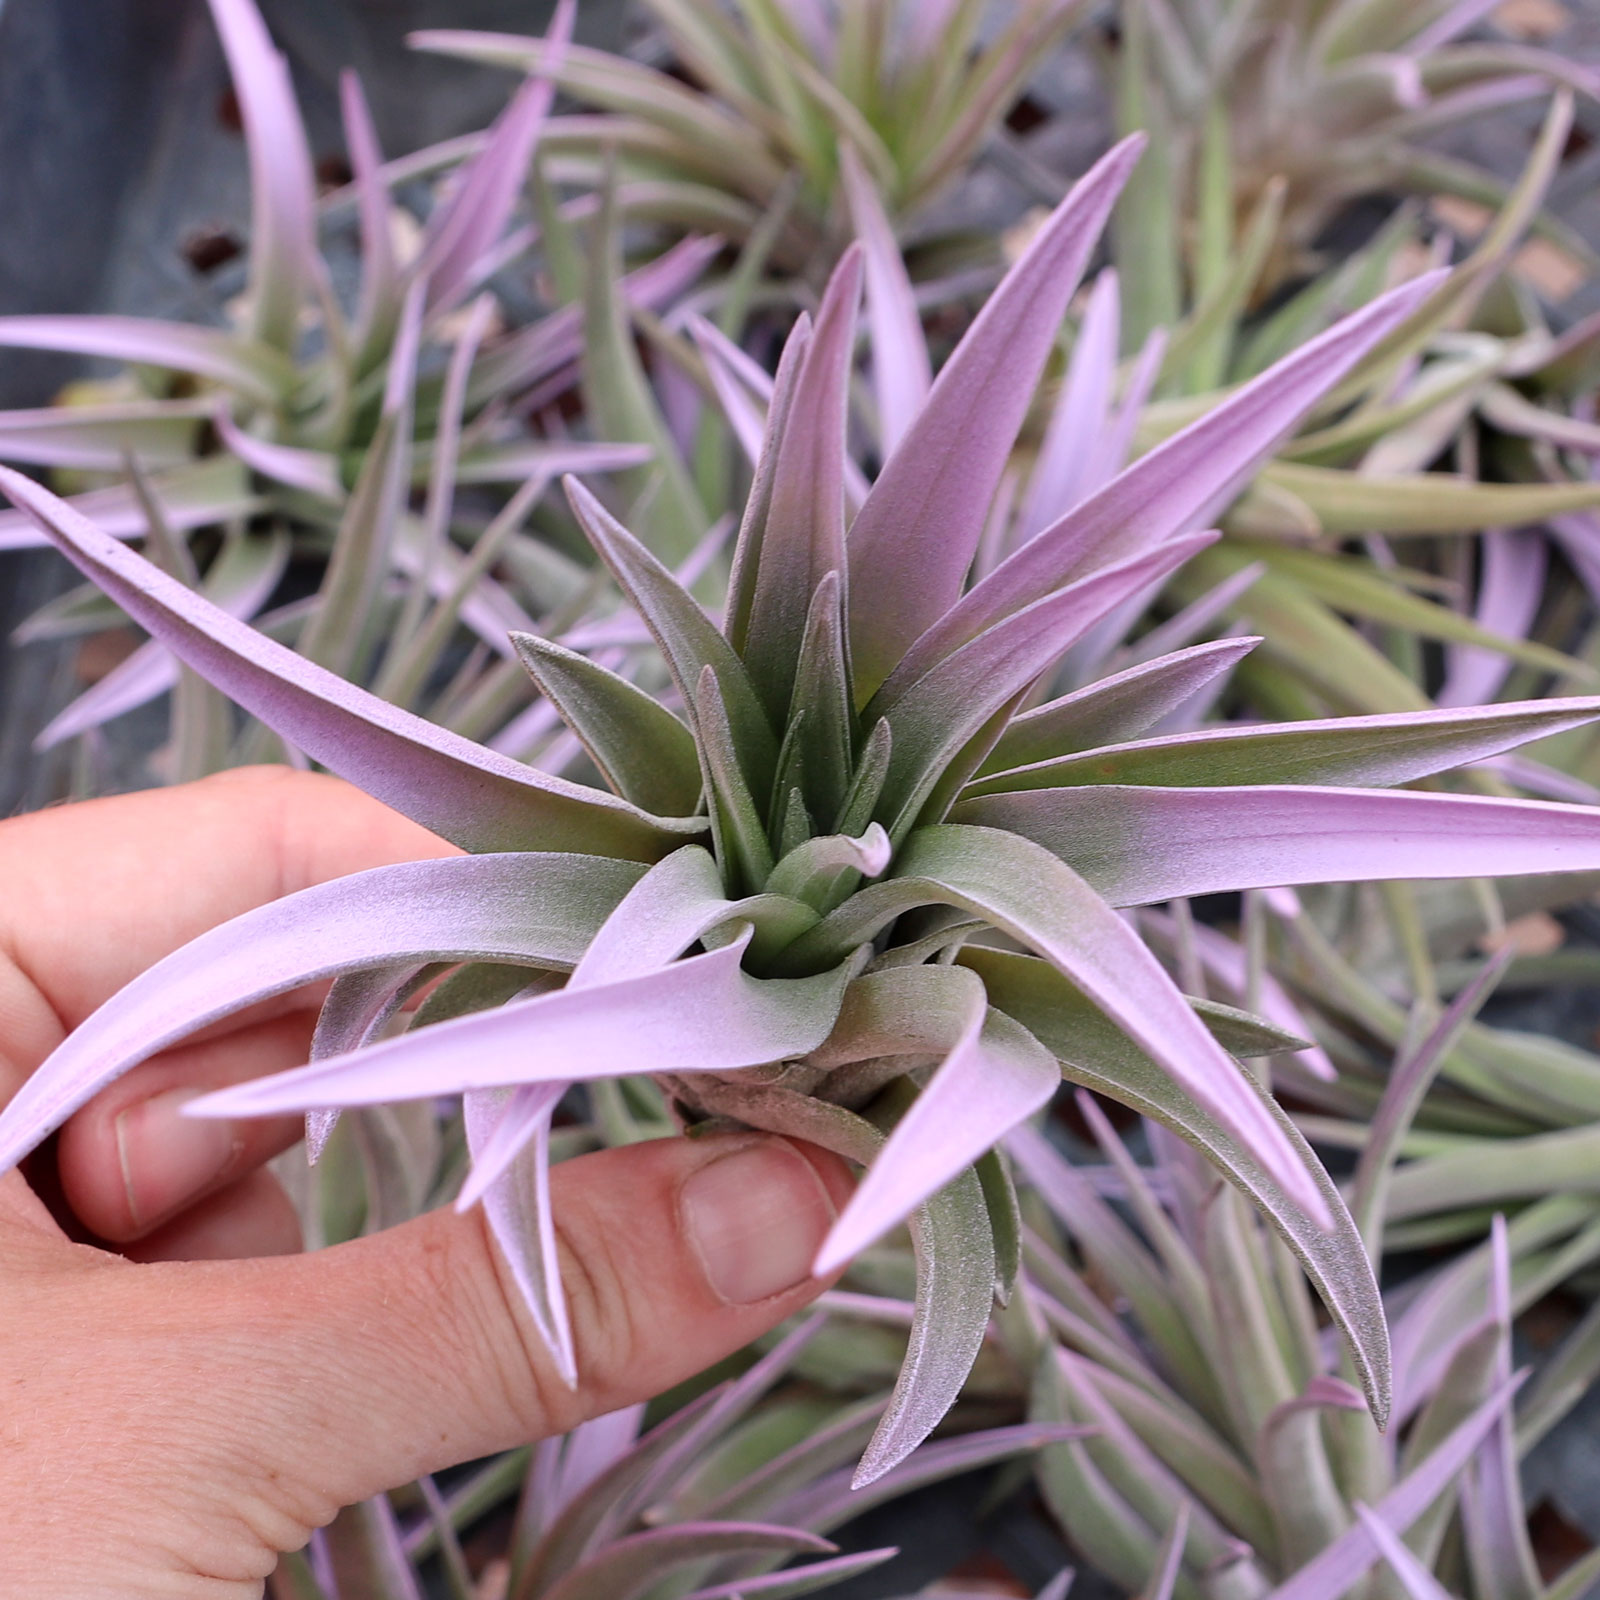 Do I need to fertilize my air plants?